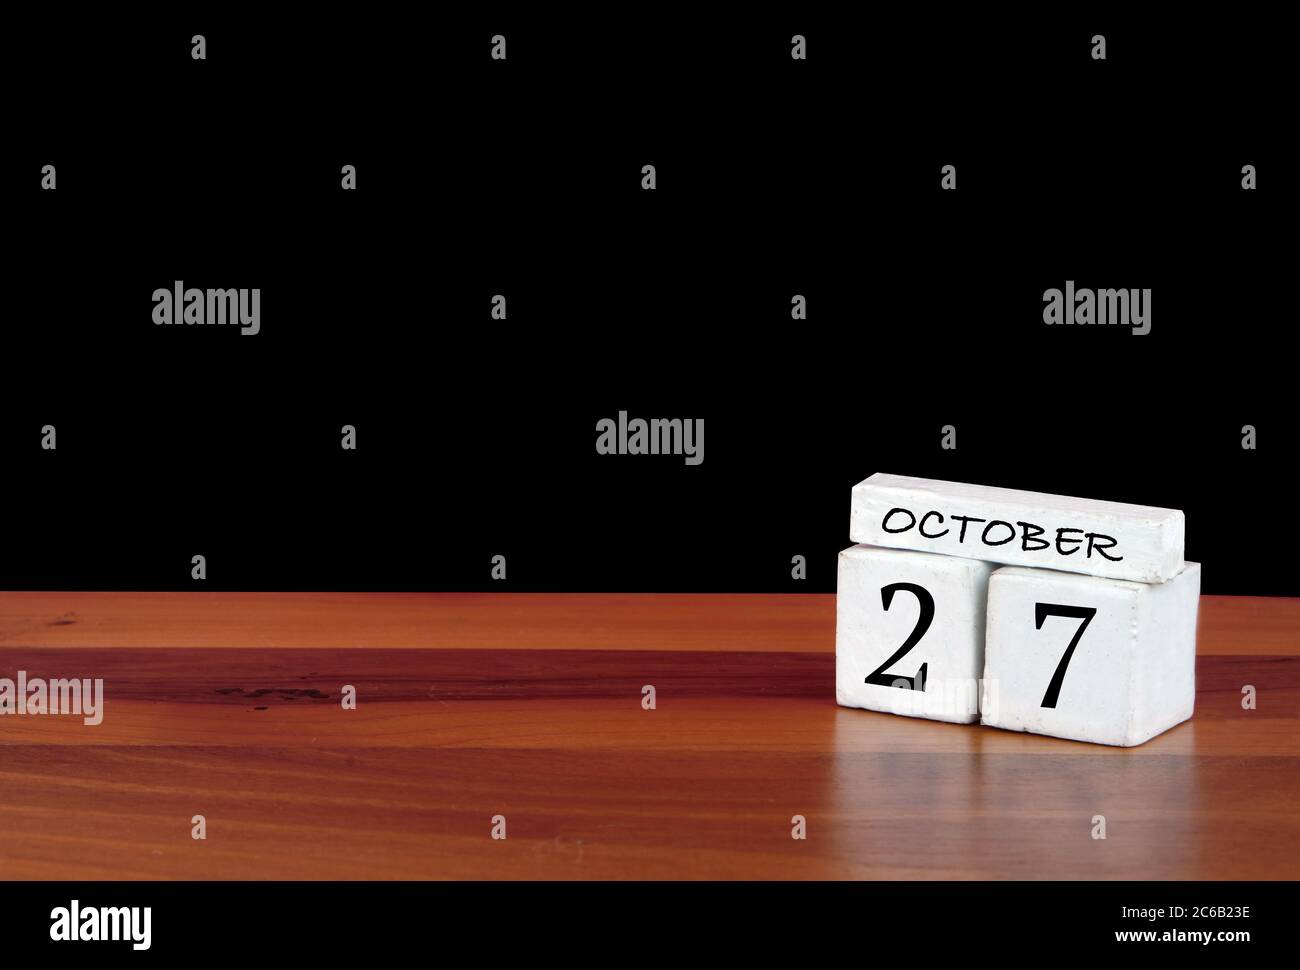 27 October calendar month. 27 days of the month. Reflected calendar on wooden floor with black background Stock Photo